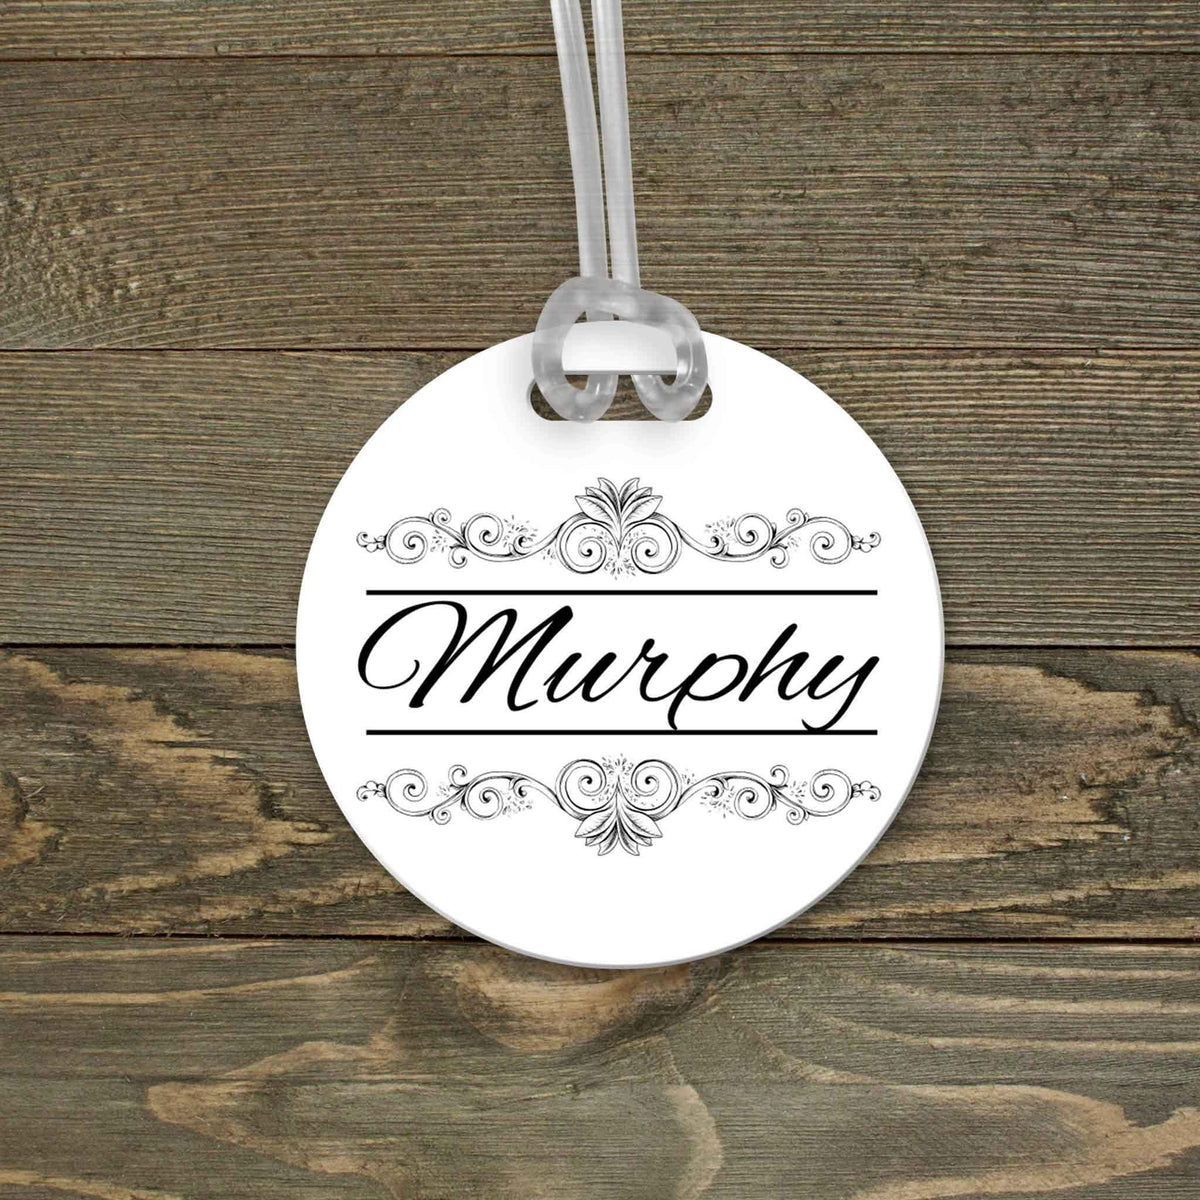 This &amp; That Solutions - Personalized Luggage Tag | Custom Monogram Bag Tag | Decorative Vine - Personalized Gifts &amp; Custom Home Decor